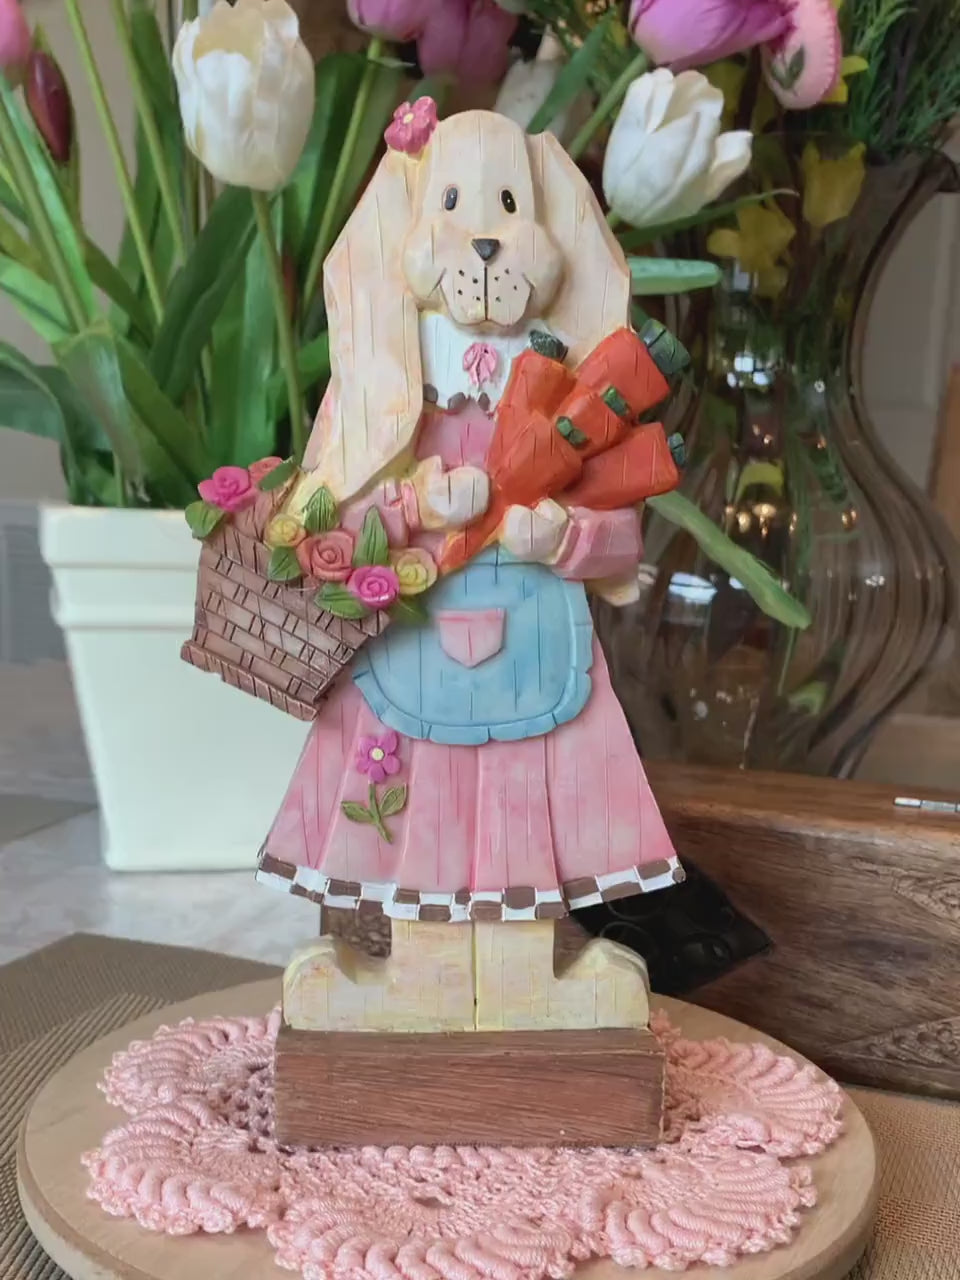 Vintage Resin Easter Bunny Girl Figurine with Doily